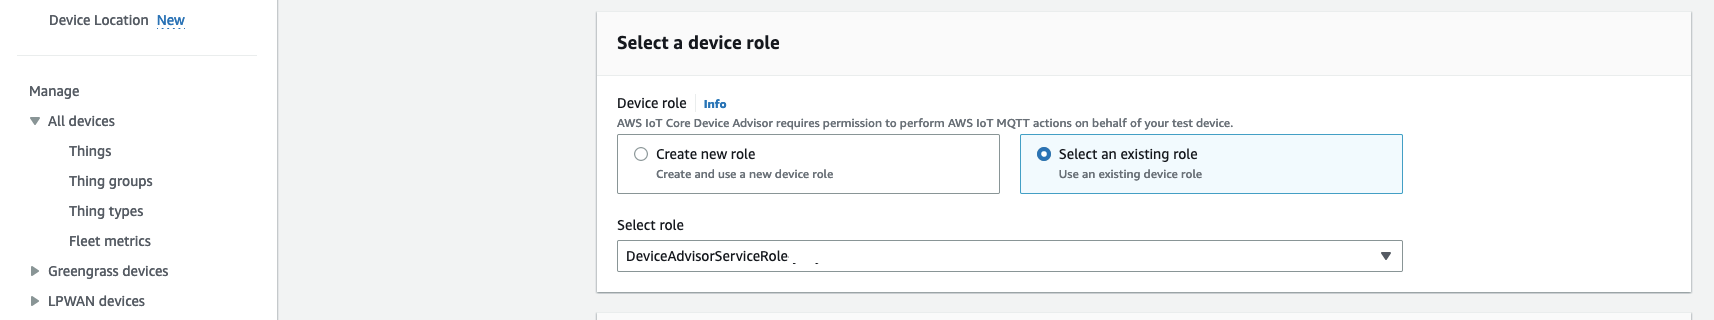 
                        A web form interface for selecting a device role, with options to 
                            create a new role or select an existing role named "DeviceAdvisorServiceRole".
                        
                    